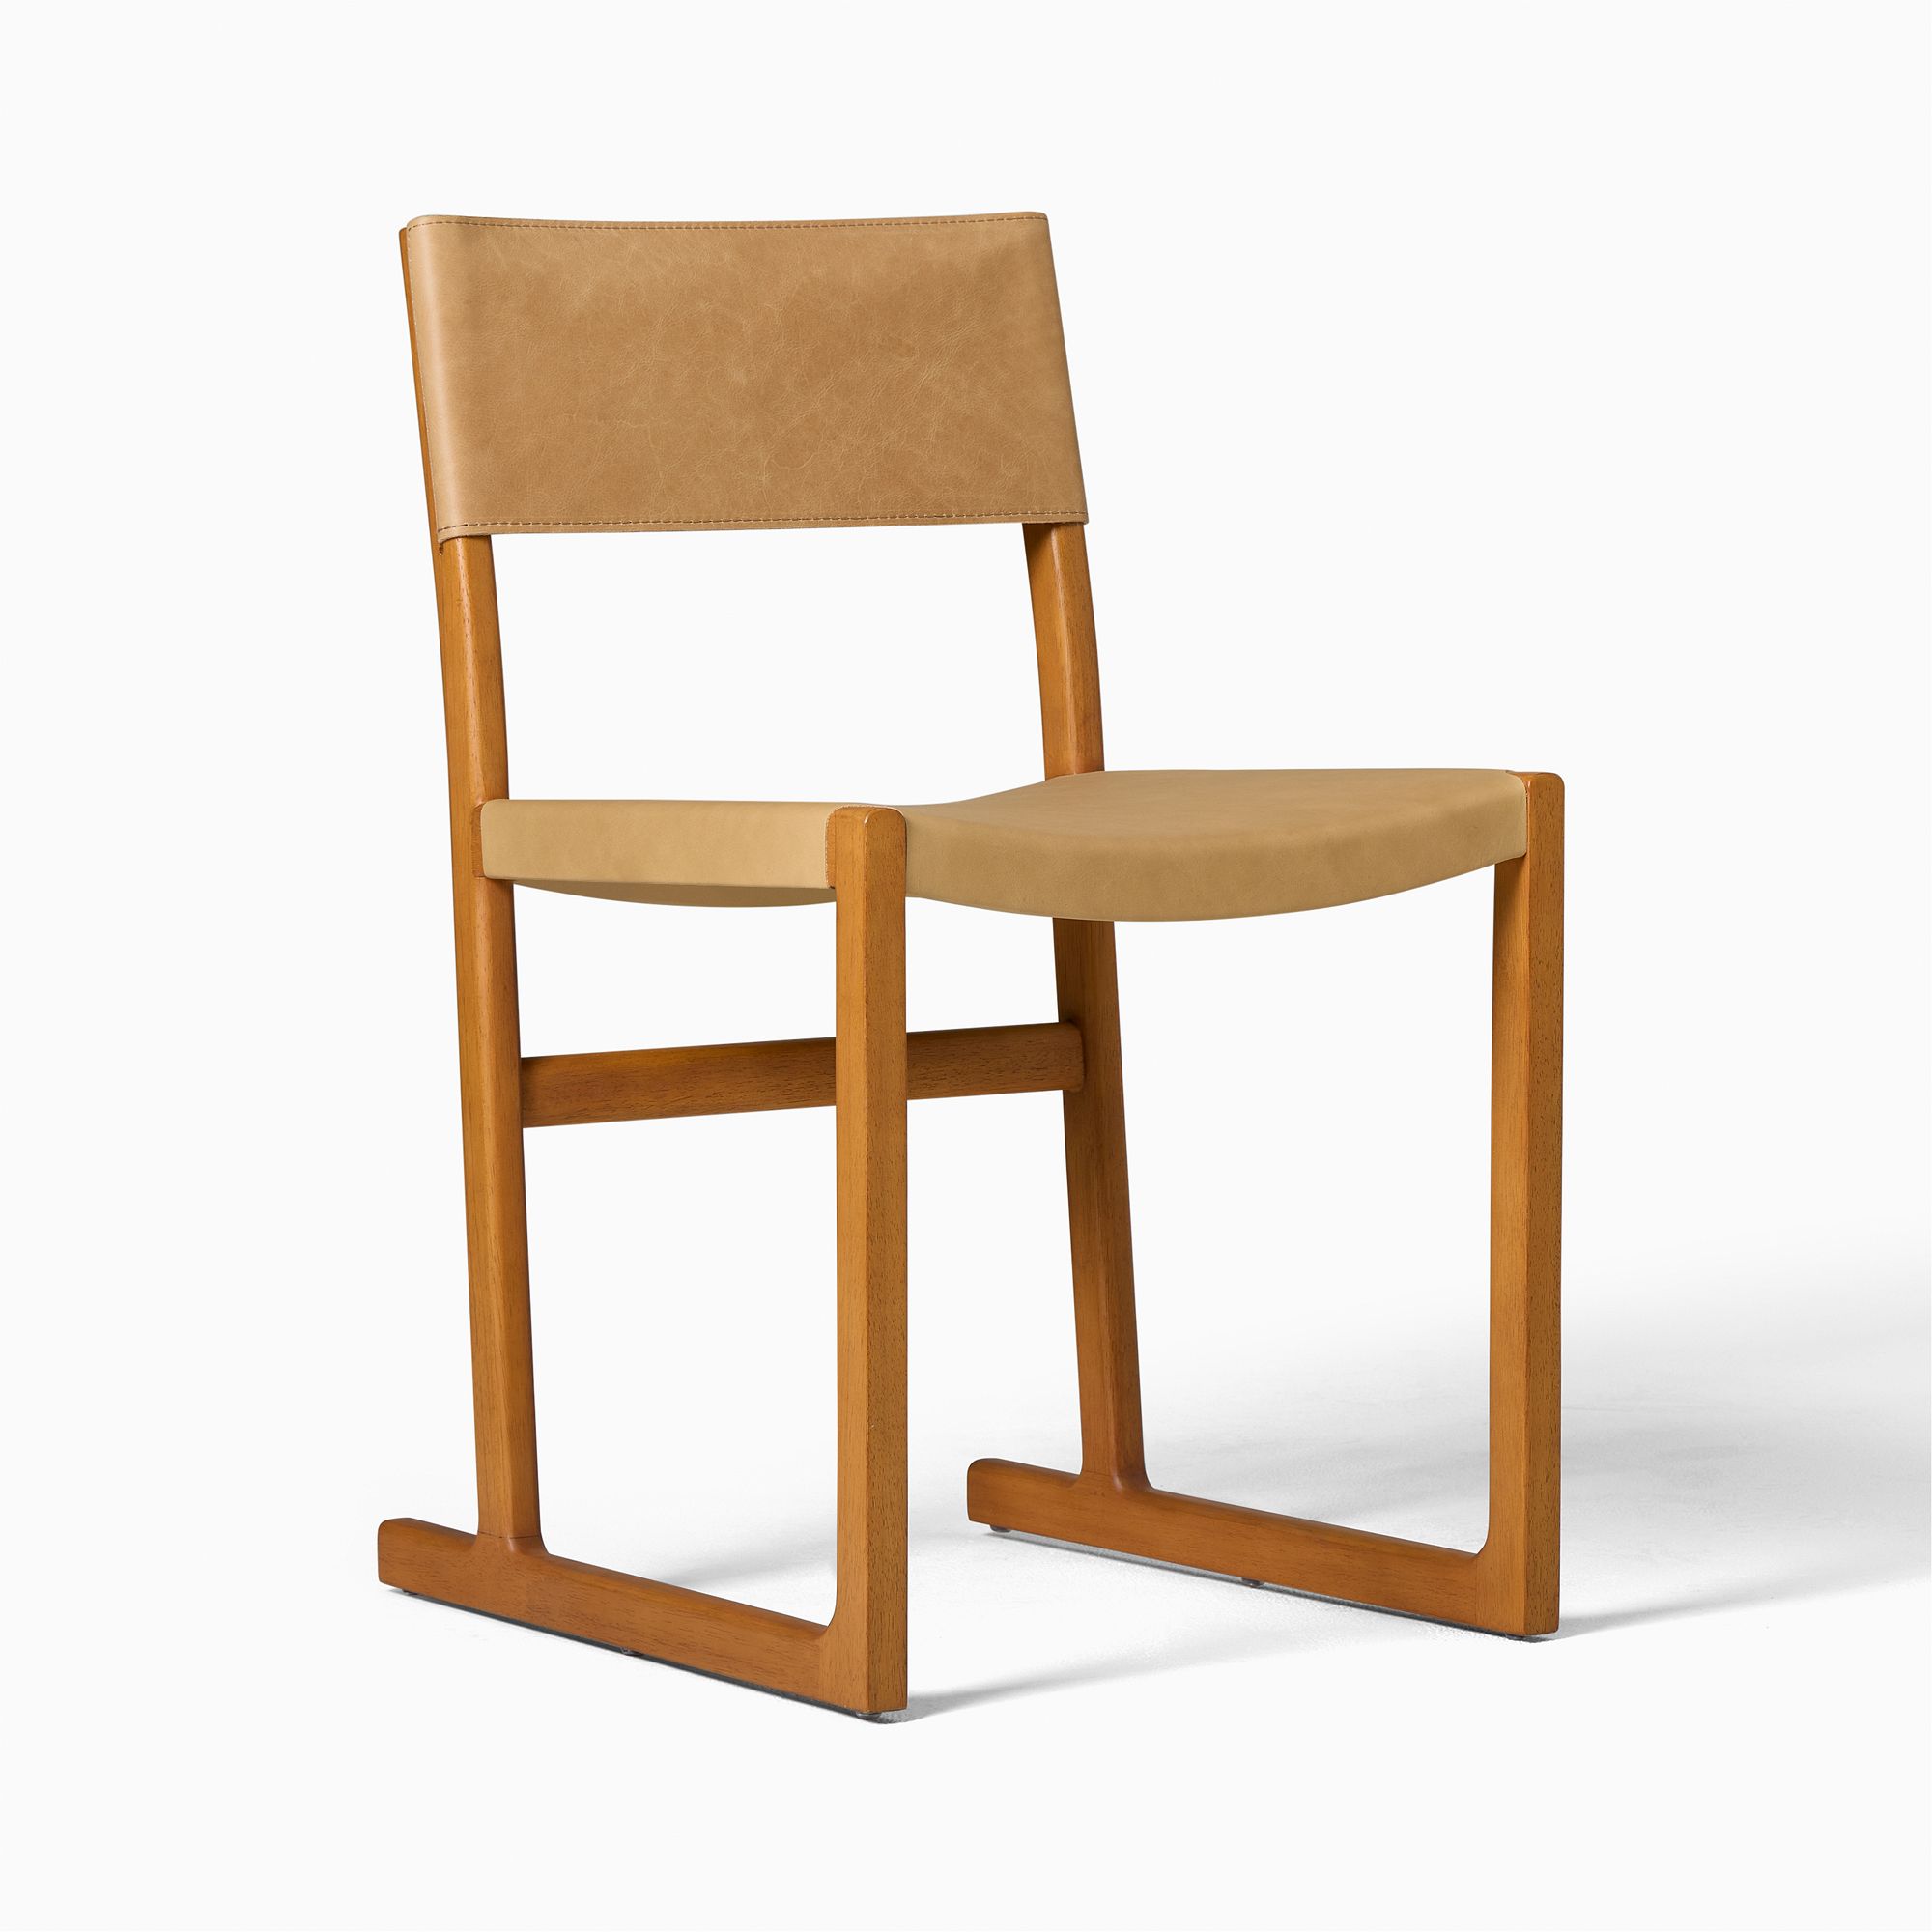 Clyde Leather Dining Chair | West Elm